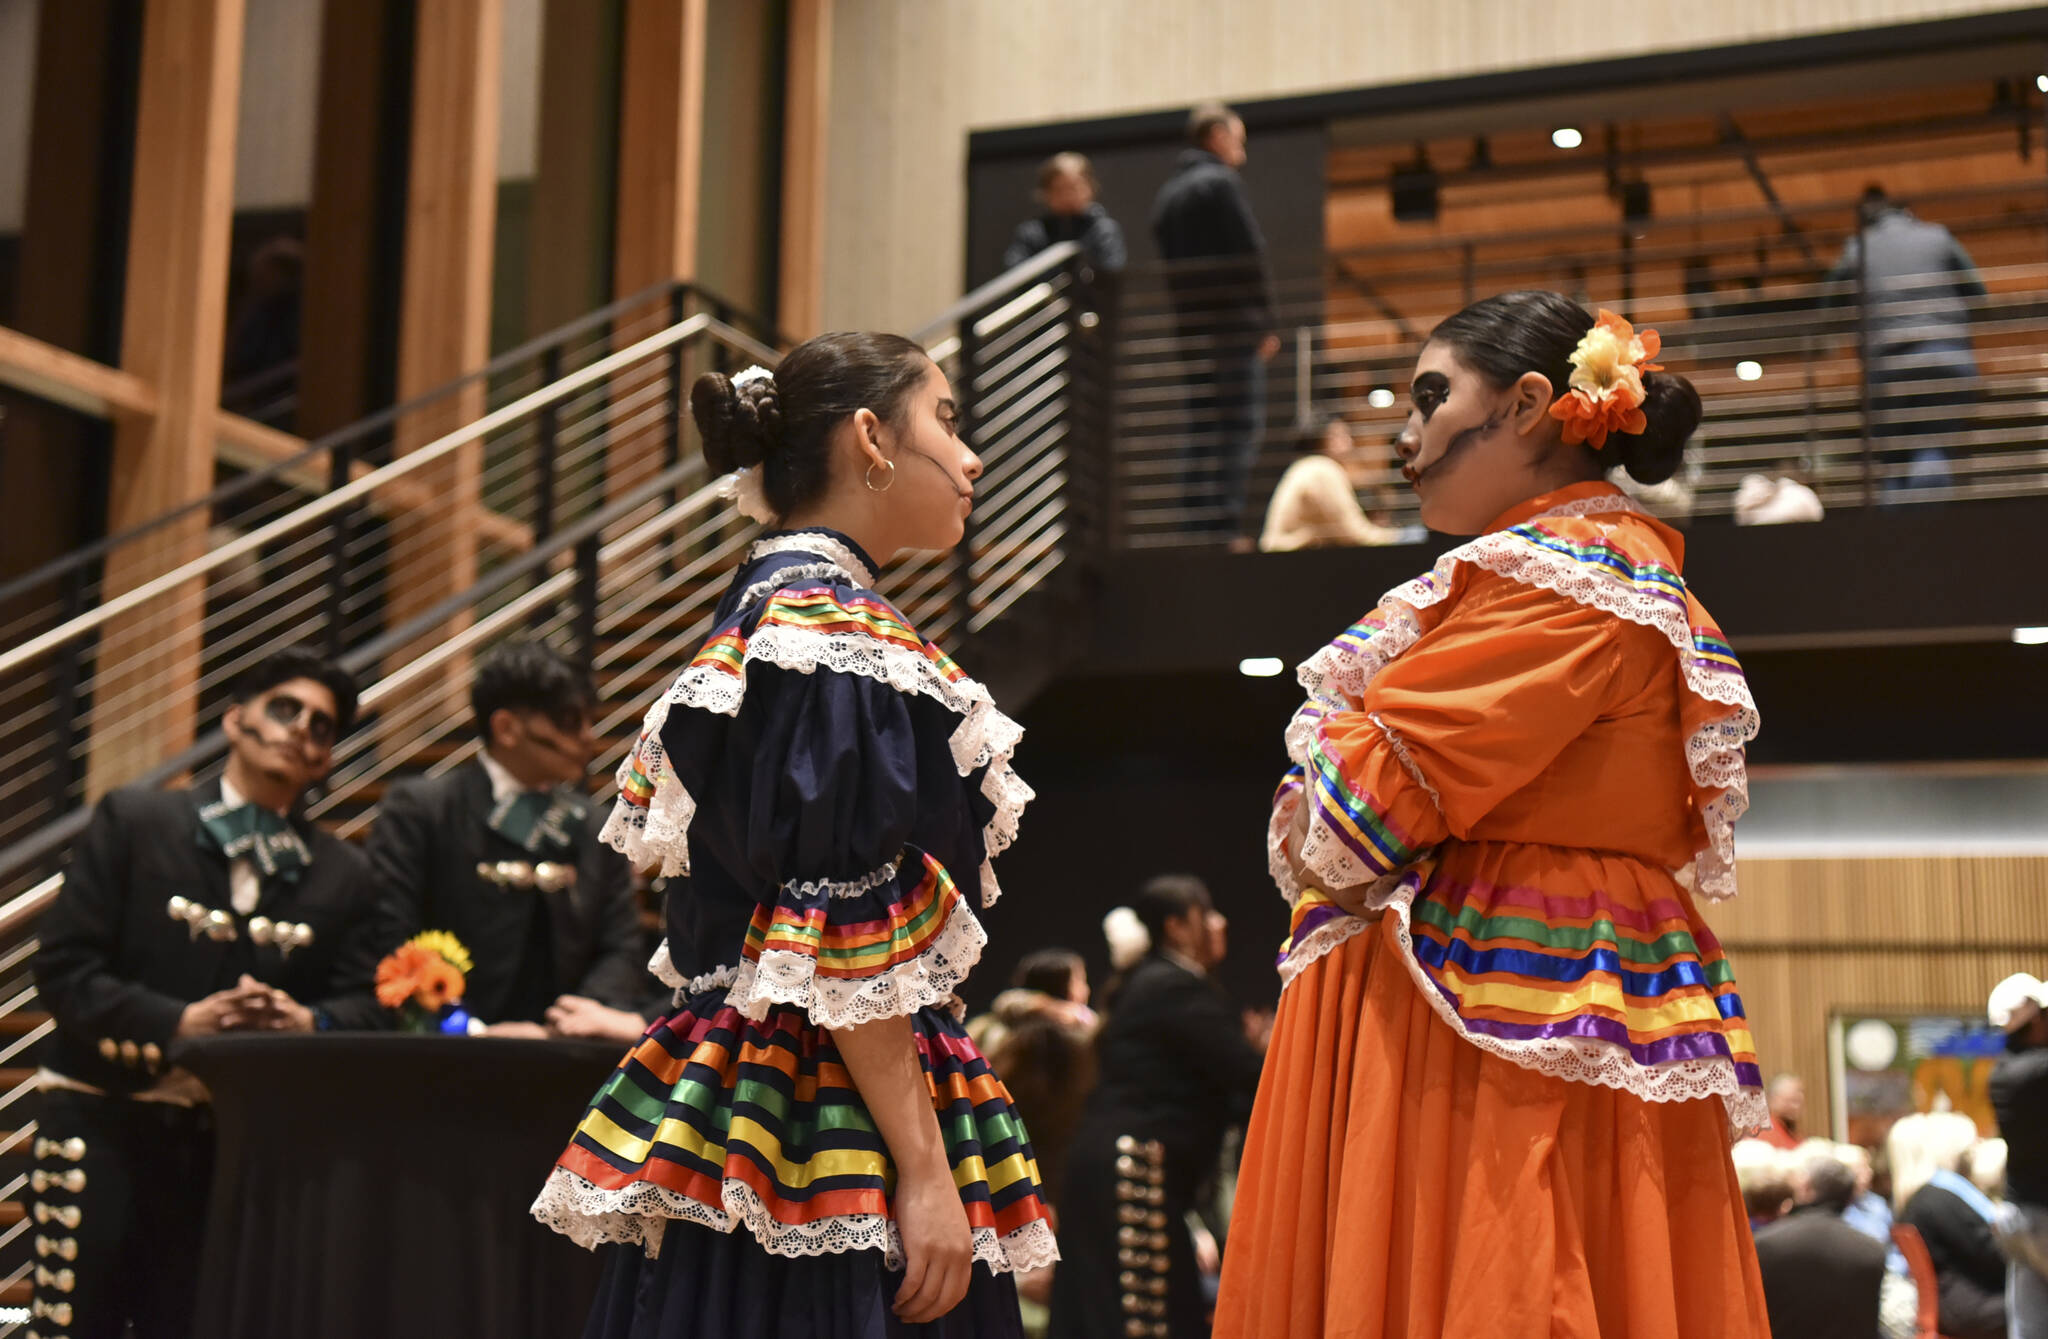 Two Mount Vernon High School Folklorico dancers wait to speak with attendees after the concert.